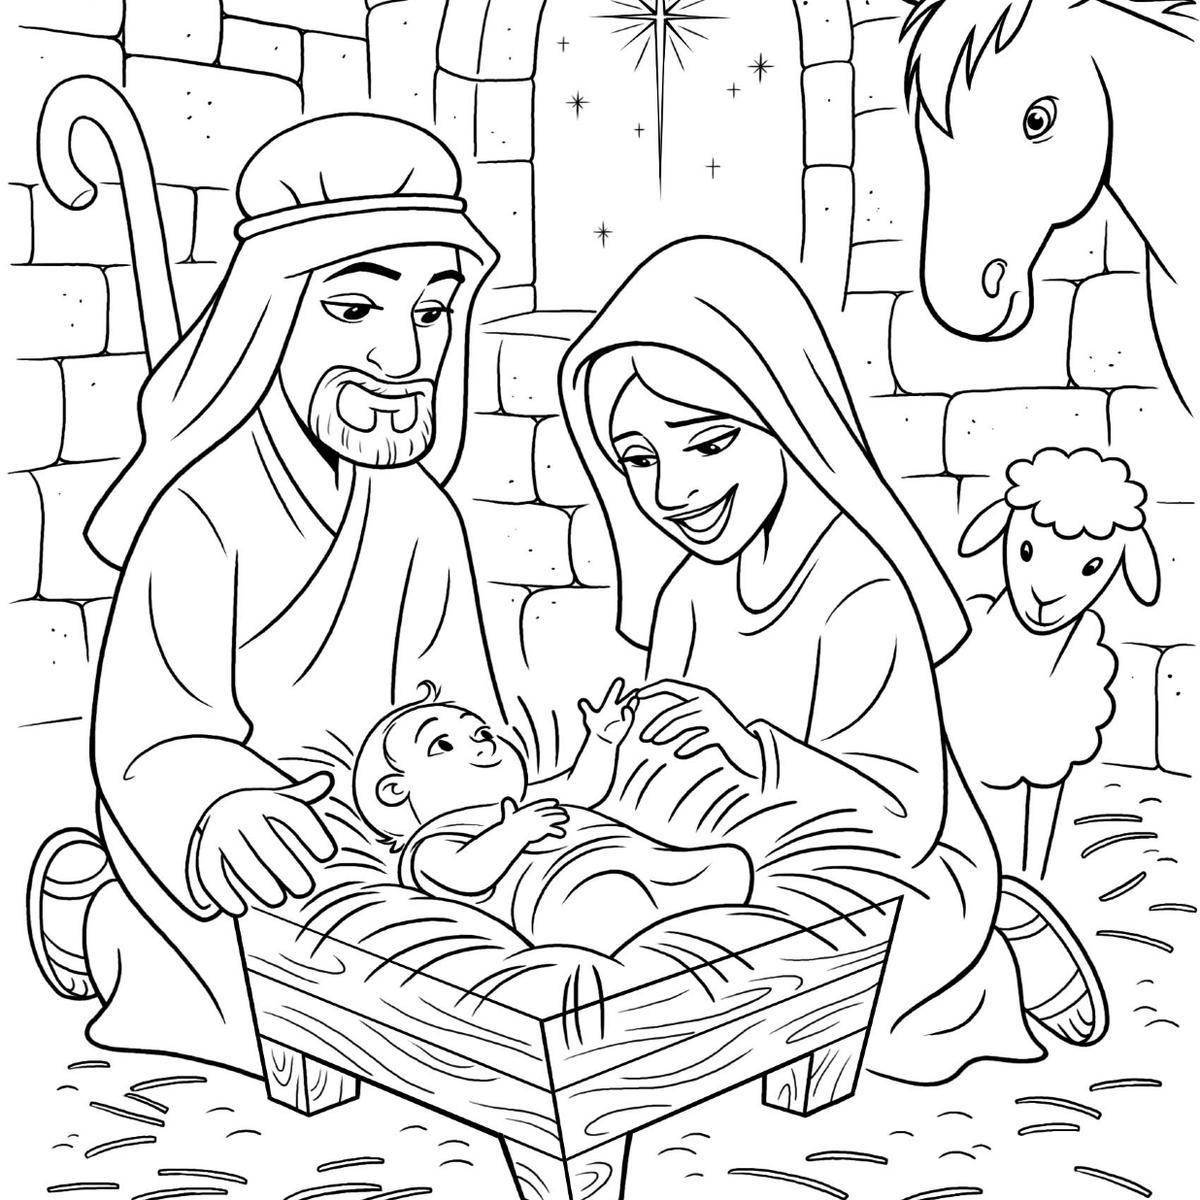 Gorgeous Christmas coloring book